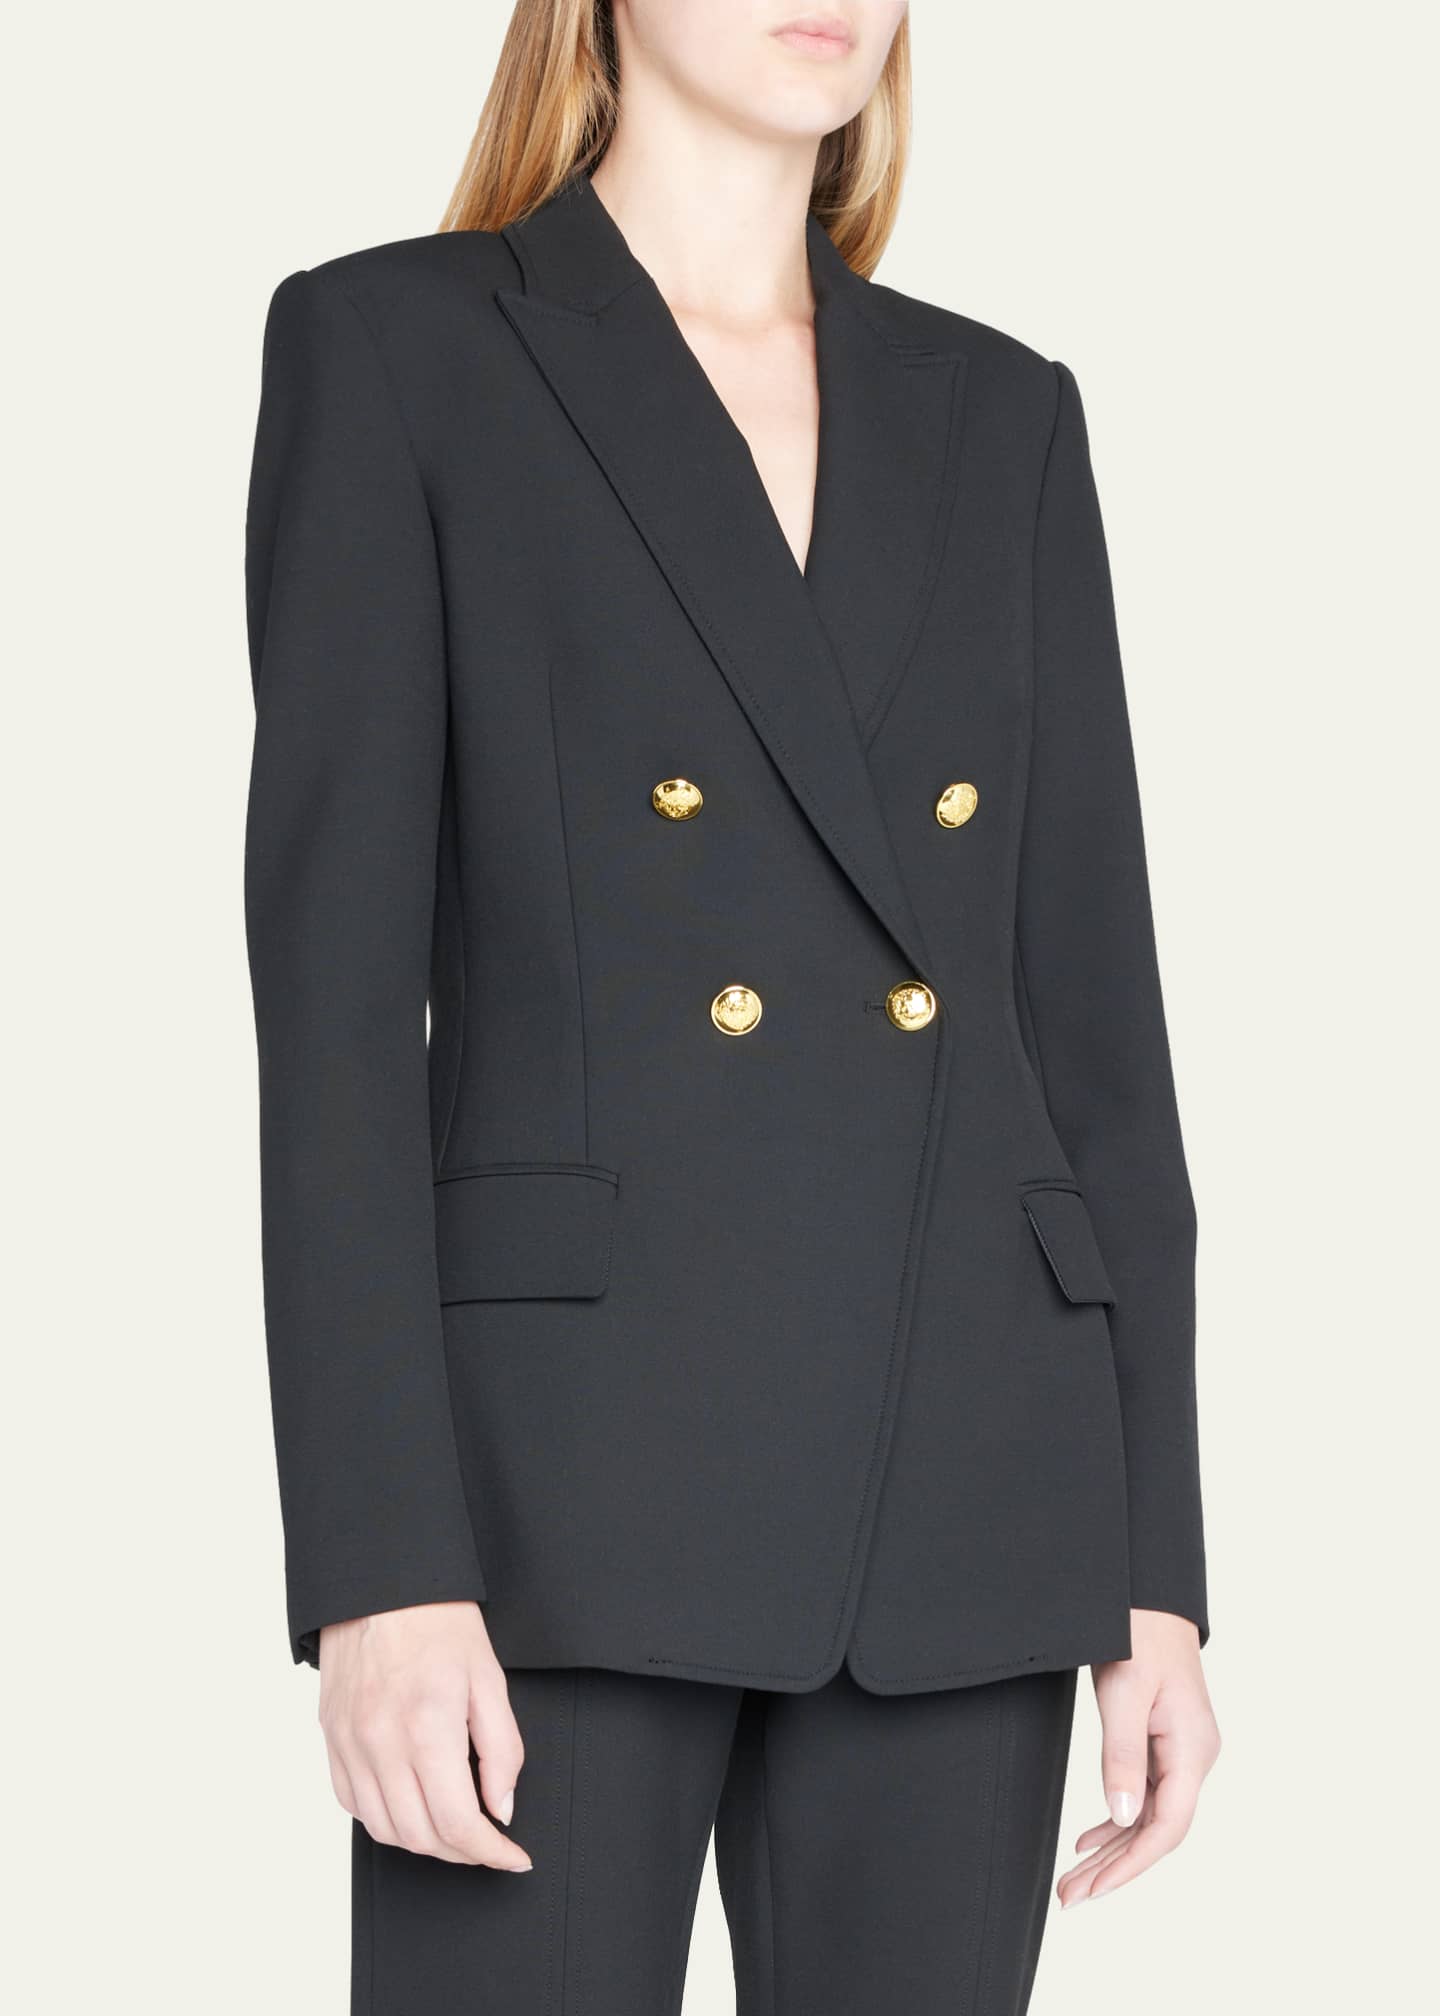 A.L.C. Sedgwick II Tailored Double-Breasted Jacket - Bergdorf Goodman